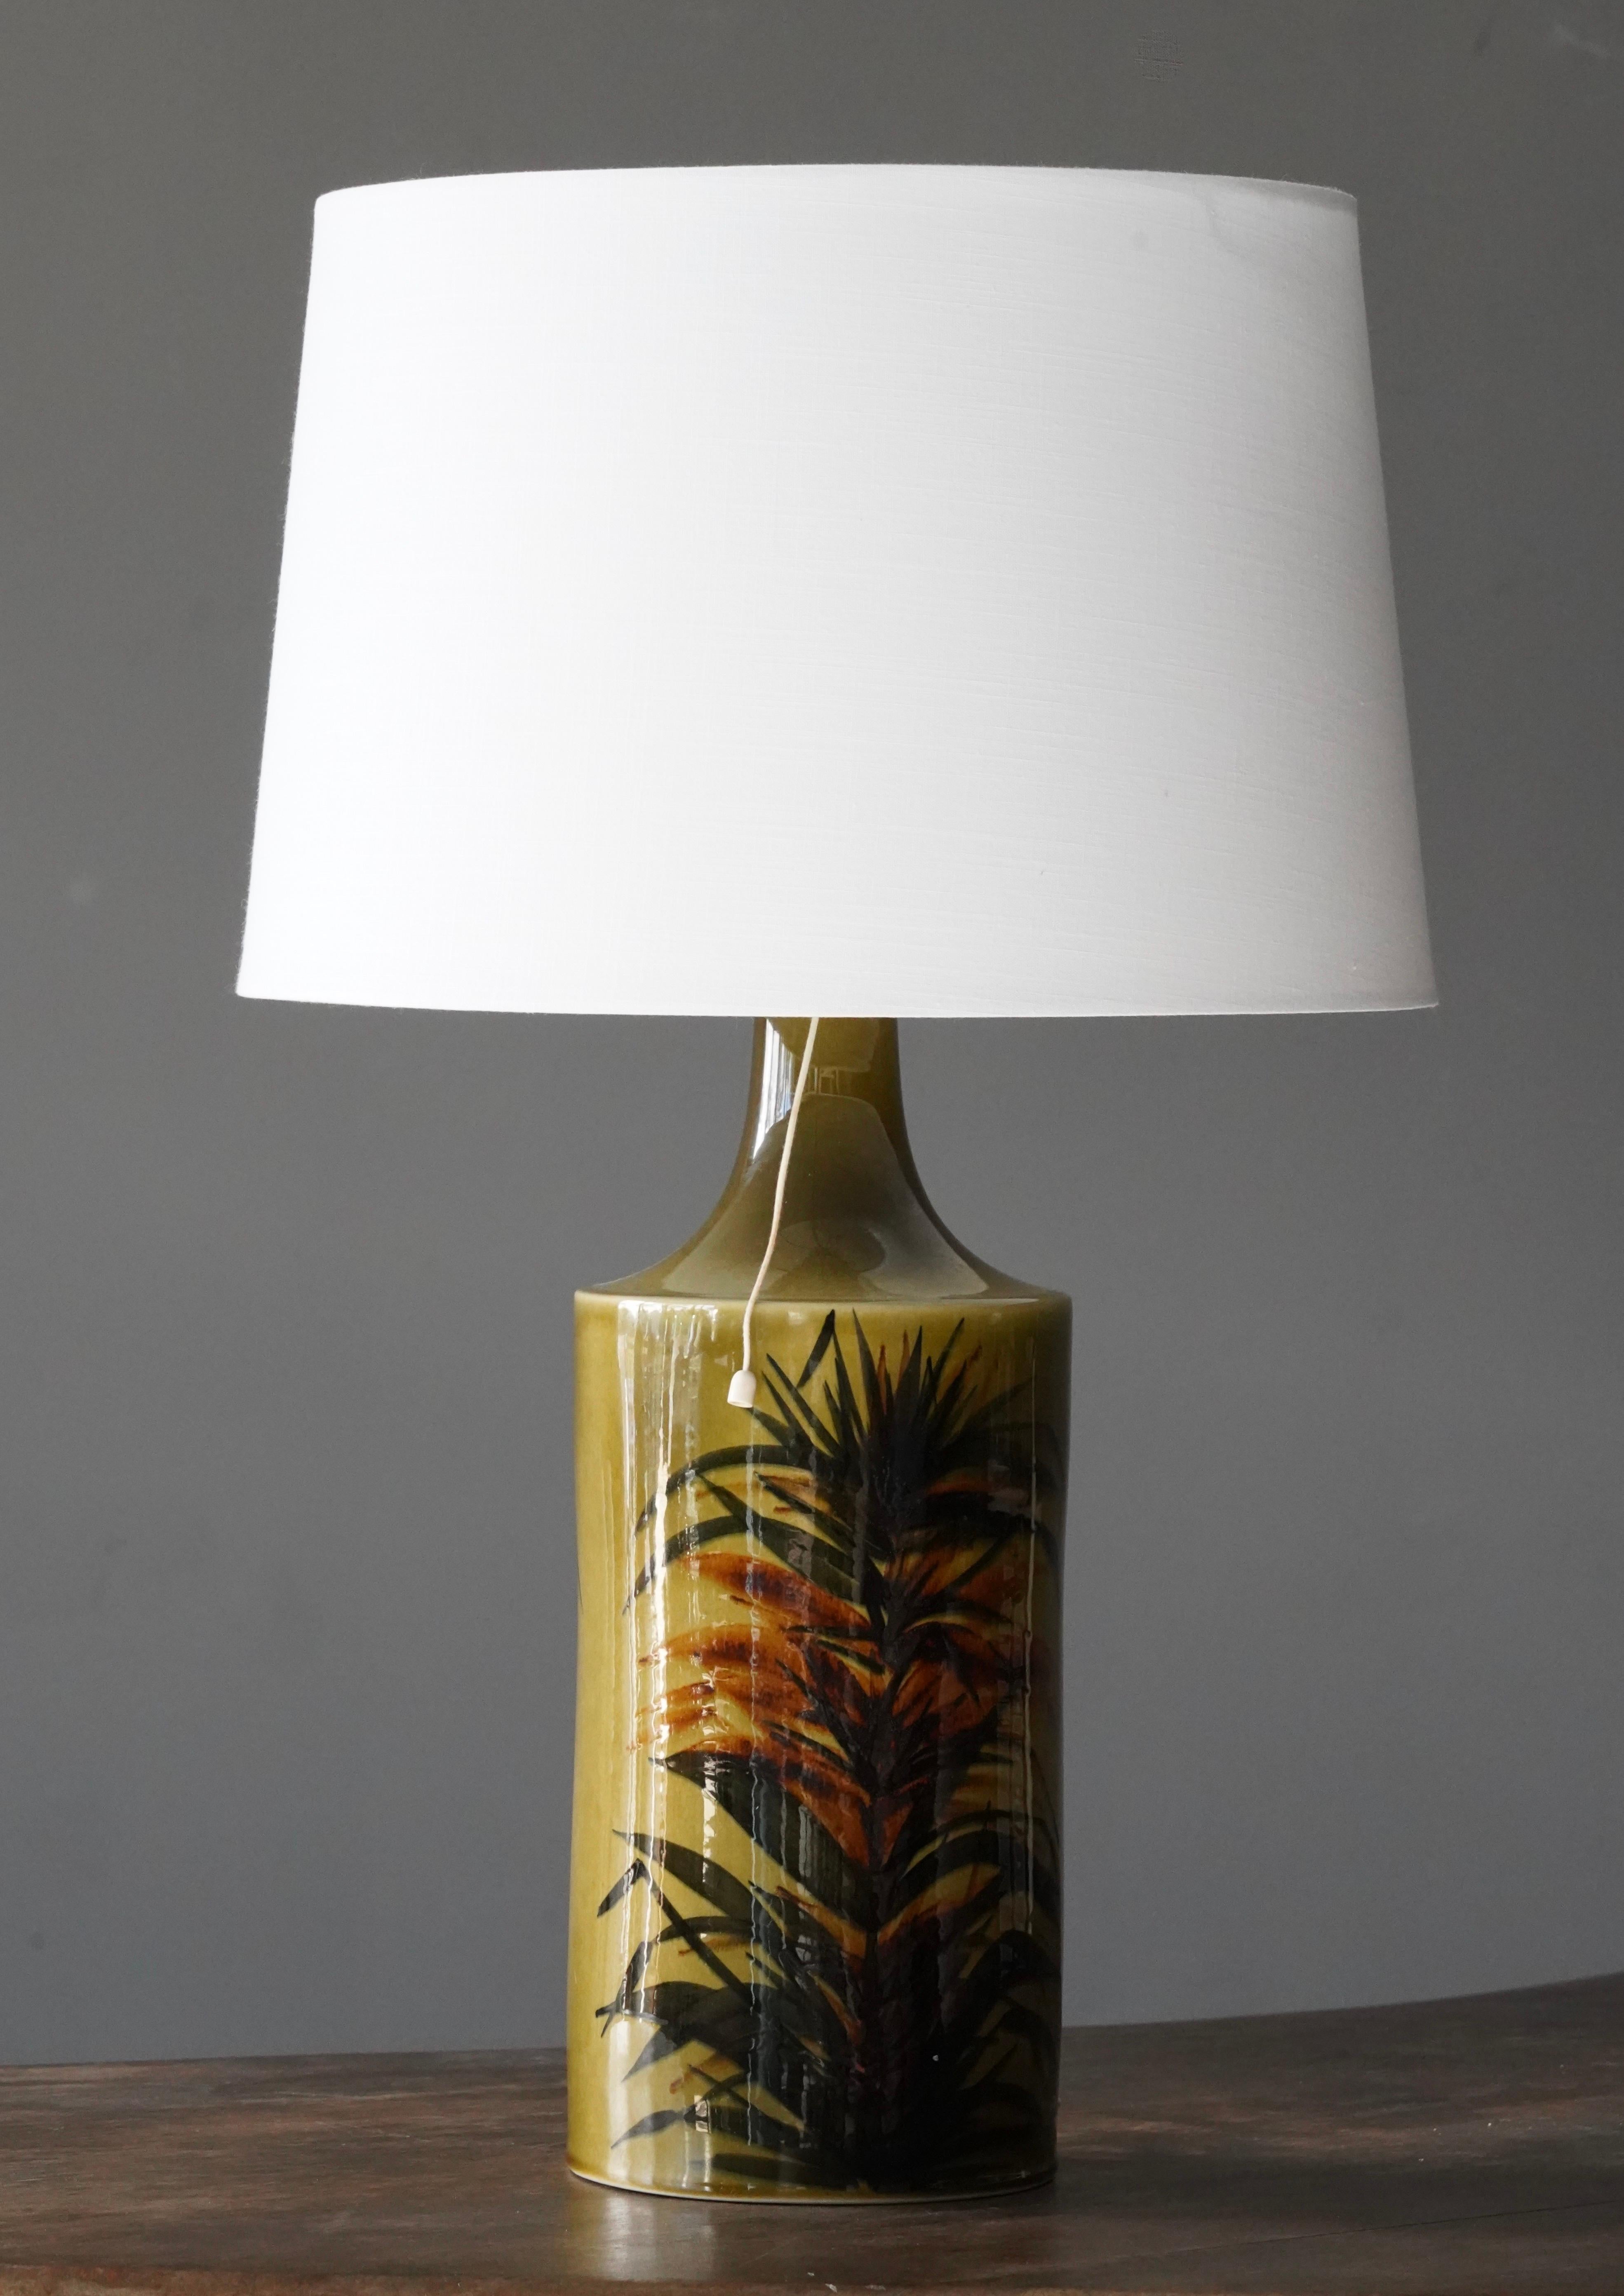 A table lamp, designed by Gunvor Olin-Grönquist. Produced by Arabia, c. 1950s-1960s.

Features glazed stoneware with hand-painted floral motifs.

Dimensions listed are without shade. 
Dimensions with shade: height is 24 inches, width is 15